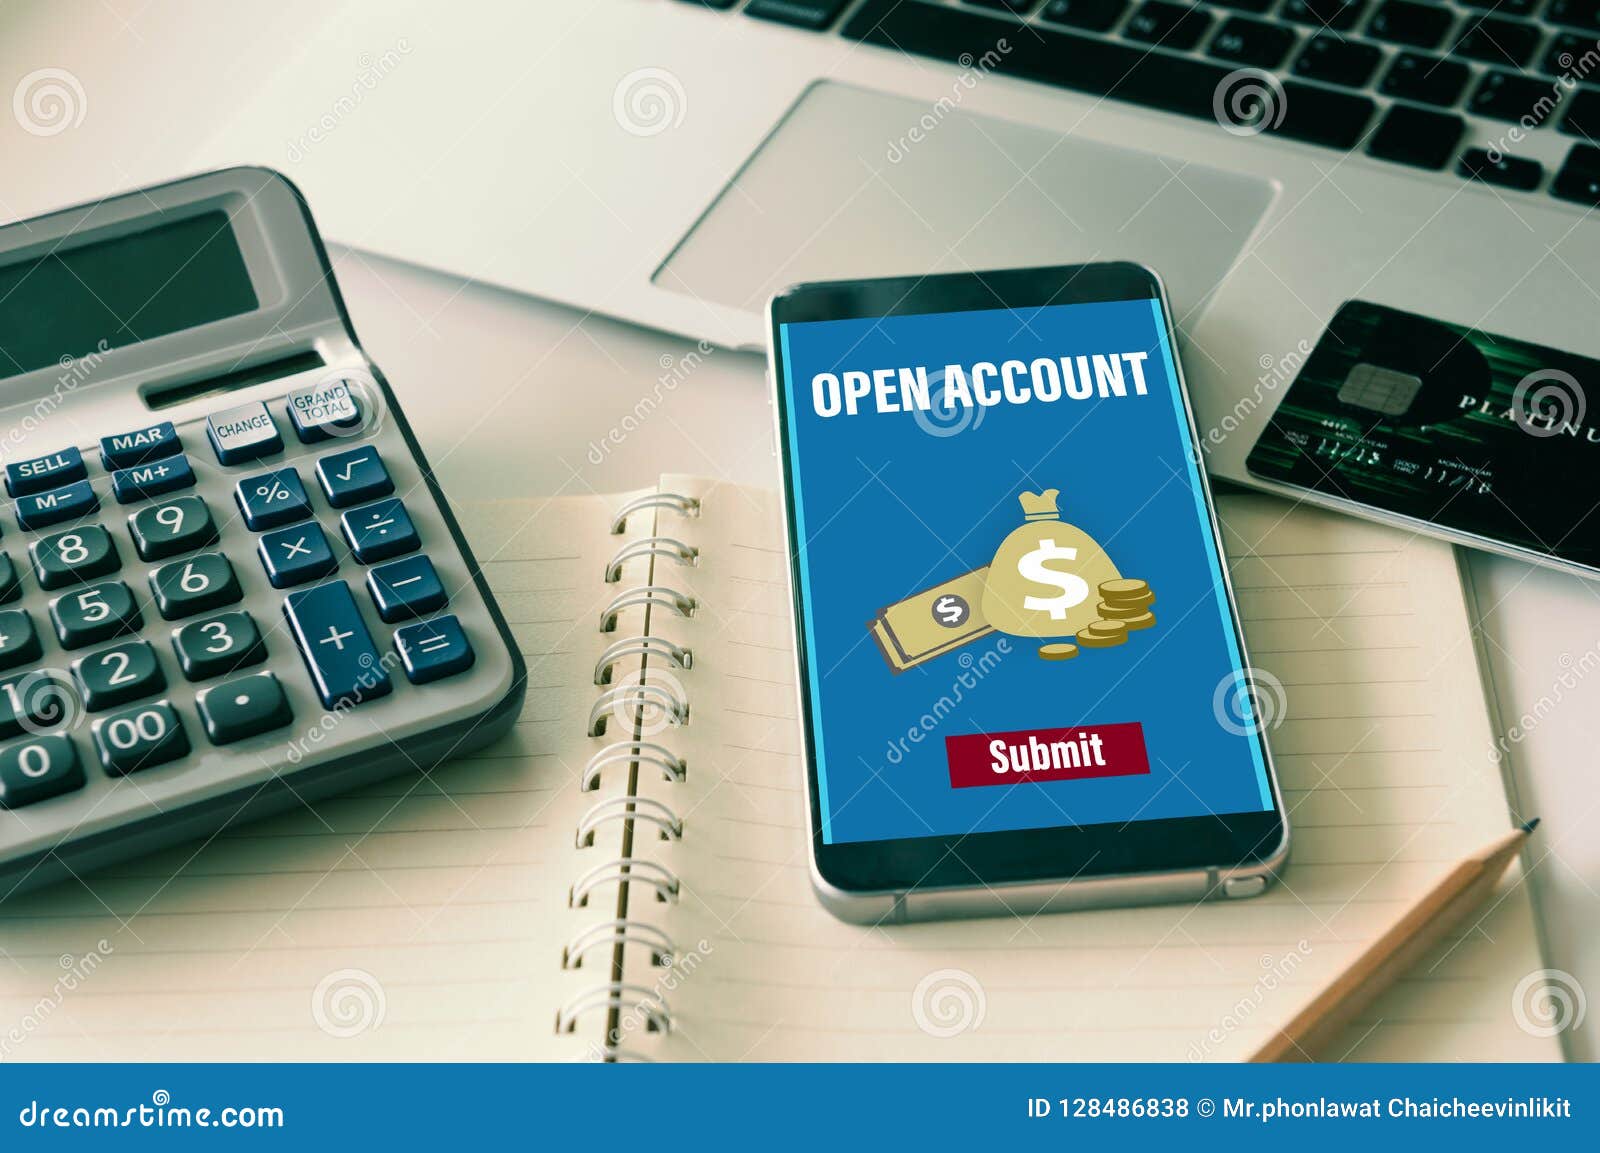 Open a bank account online stock photo. Image of account - 28